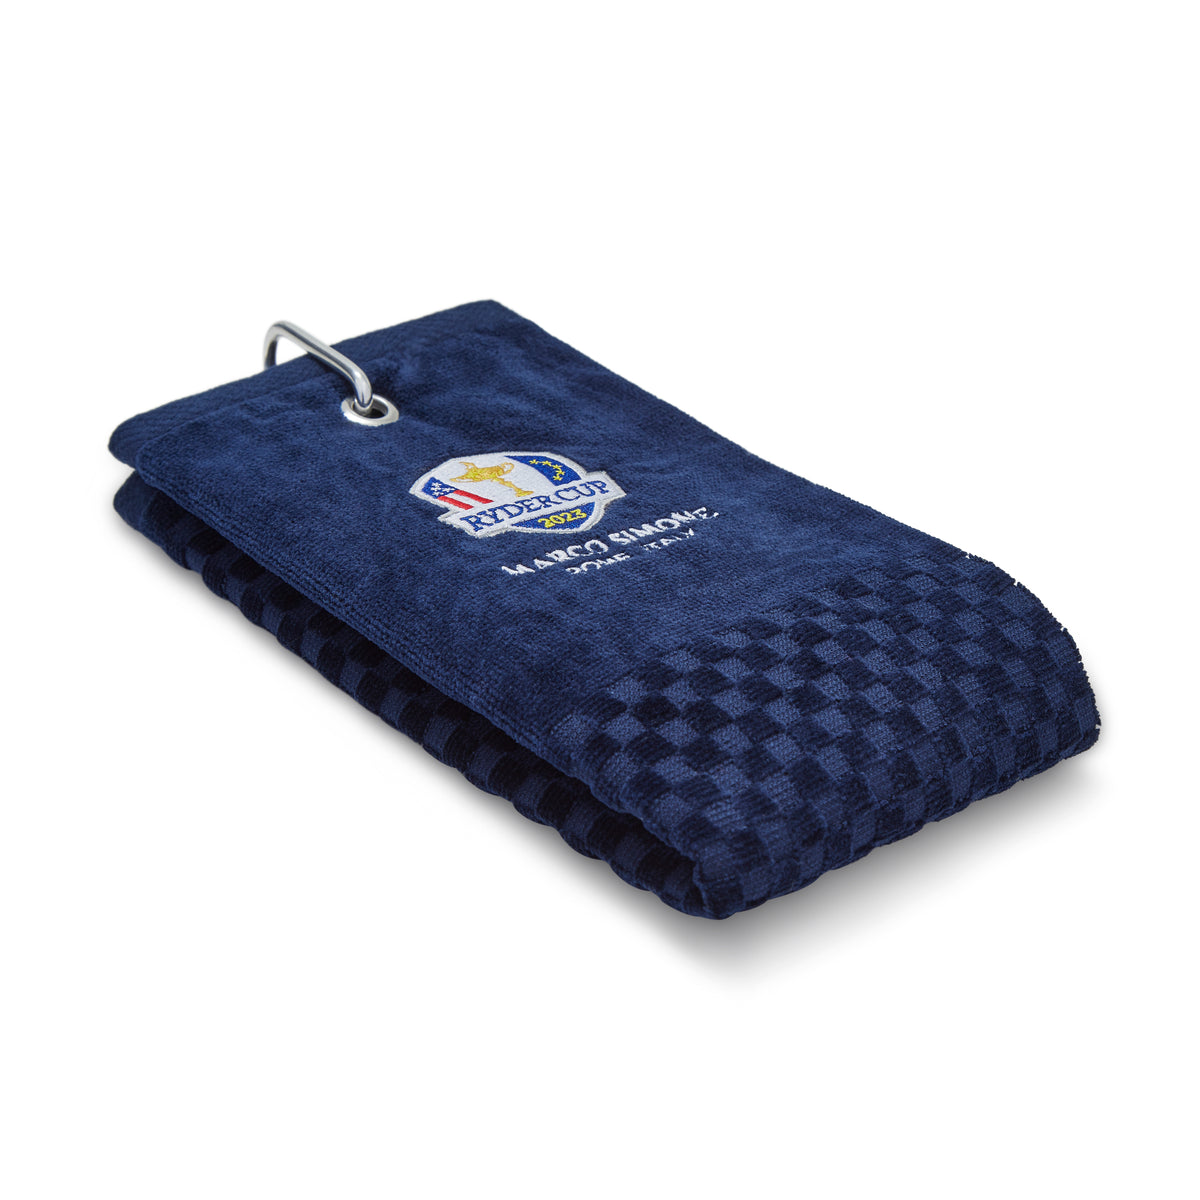 2023 Ryder Cup PRG Trifold Towel - Navy Folded